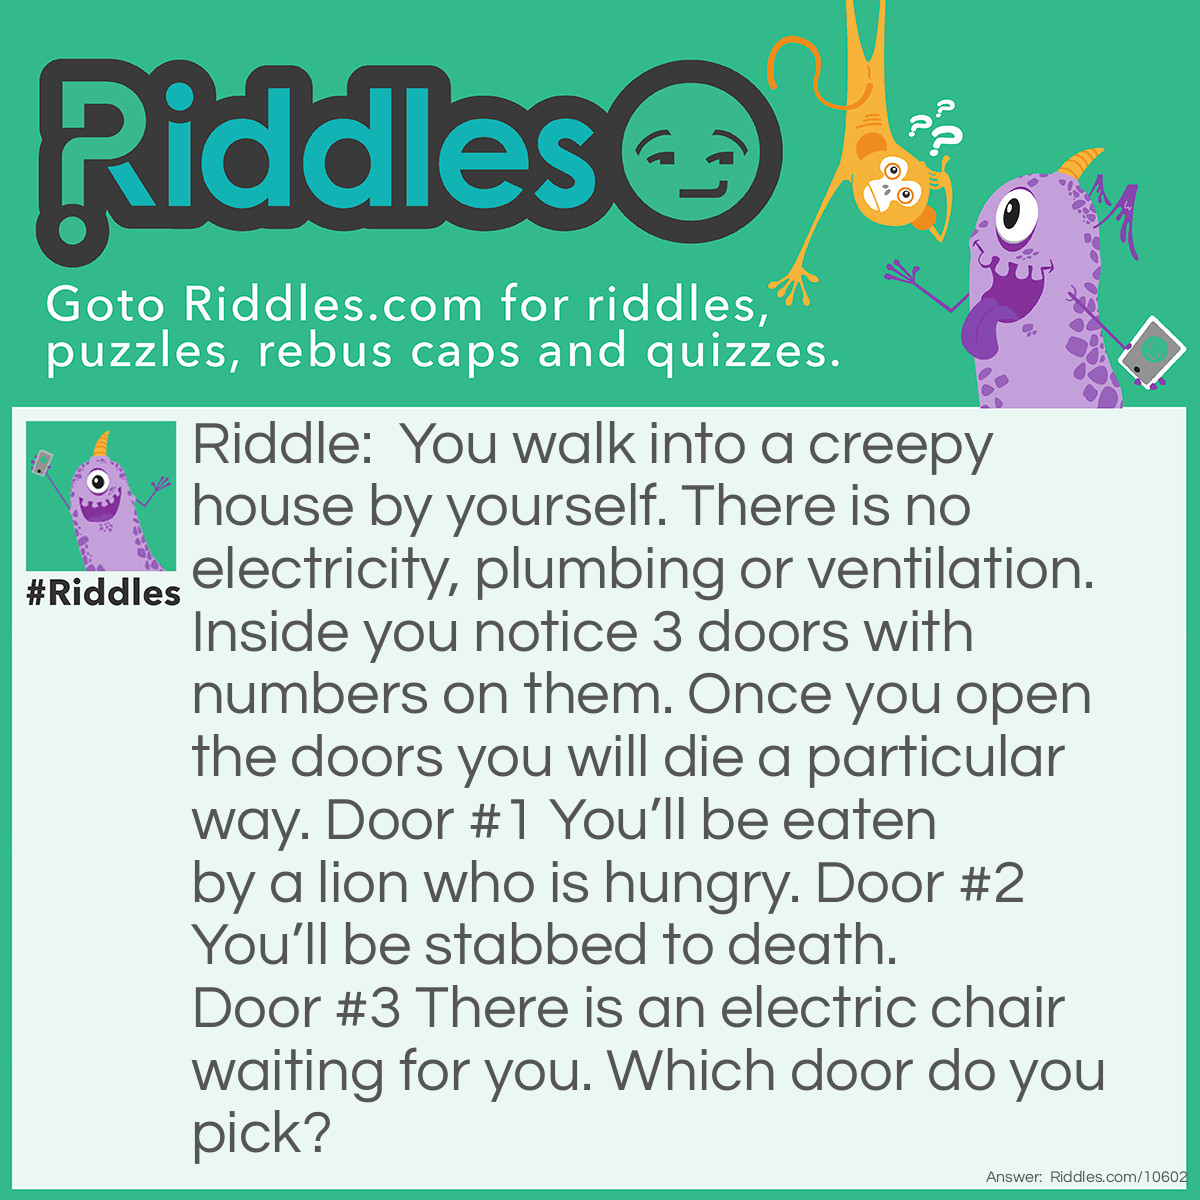 Riddle: You walk into a creepy house by yourself. There is no electricity, plumbing or ventilation. Inside you notice 3 doors with numbers on them. Once you open the doors you will die a particular way. Door #1 You’ll be eaten by a lion who is hungry. Door #2 You’ll be stabbed to death. Door #3 There is an electric chair waiting for you. Which door do you pick? Answer: Door #3, Since There Is No Electricity To Harm You.